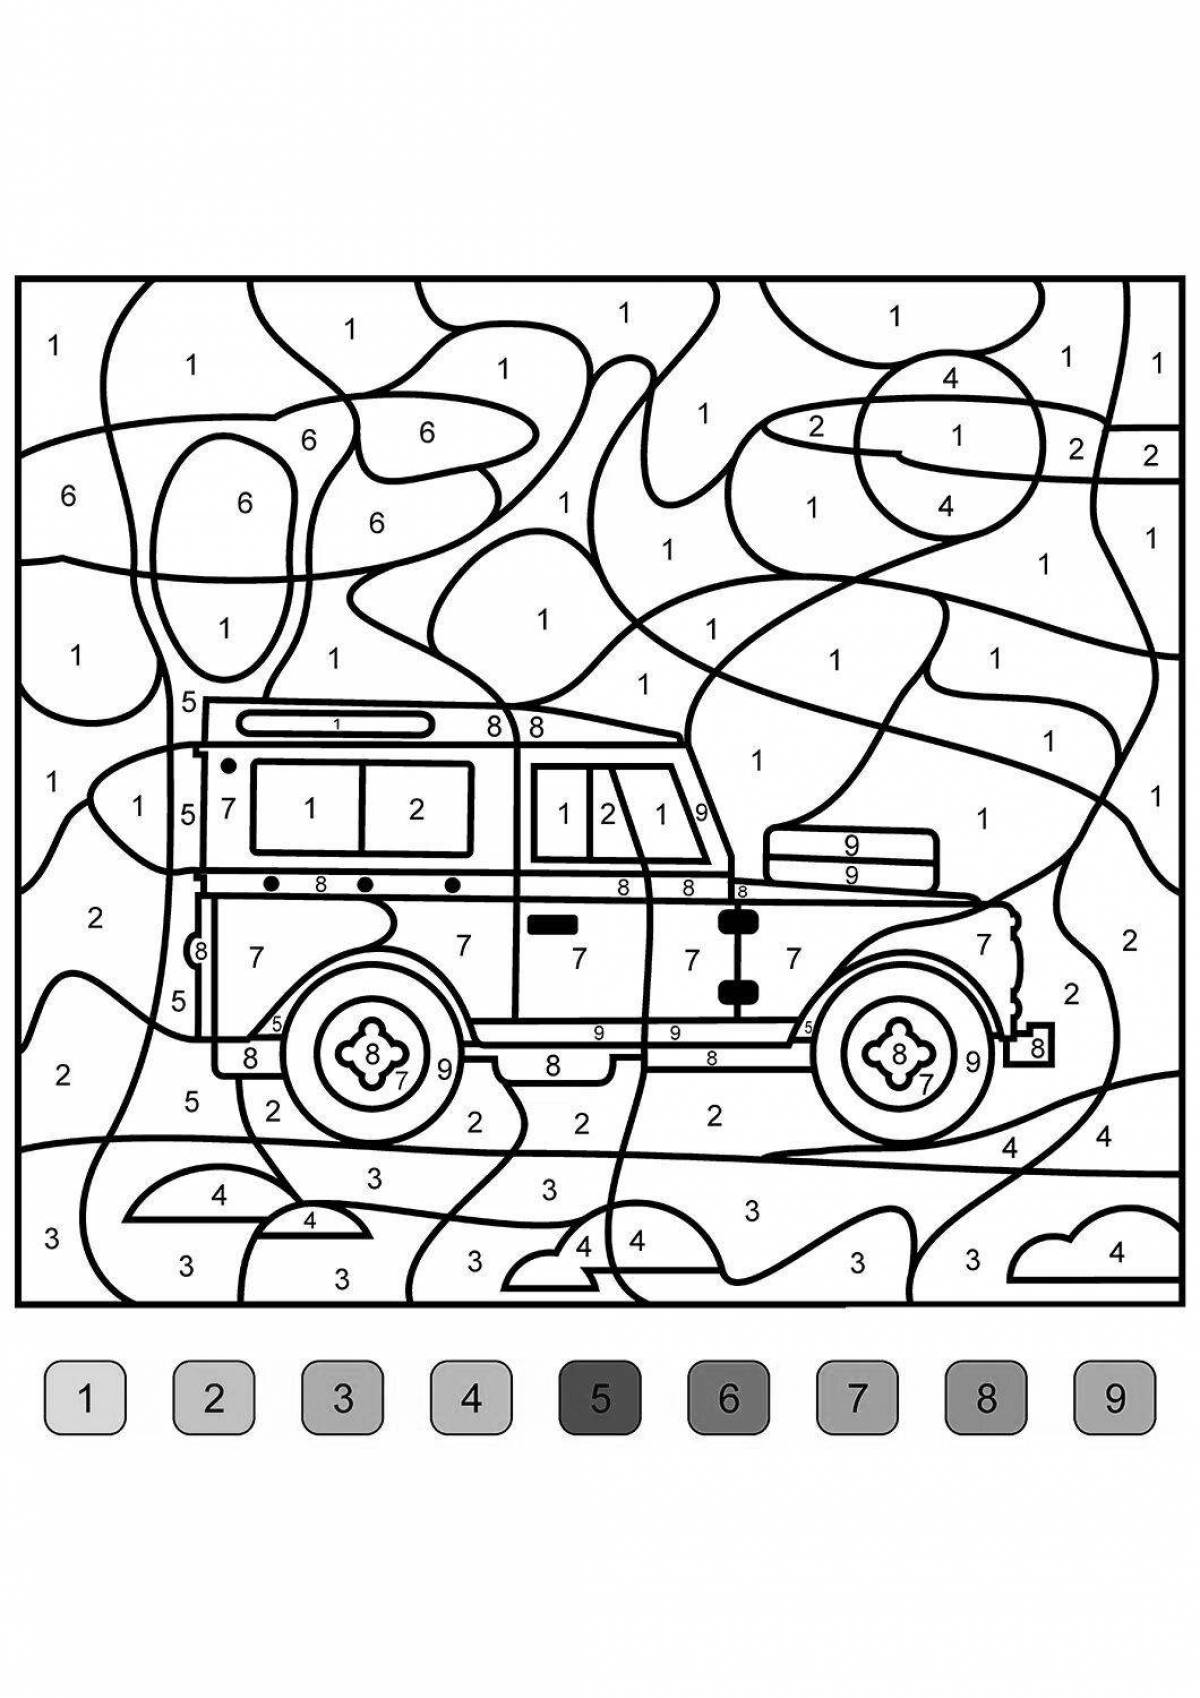 Amusing coloring pages trashbox games